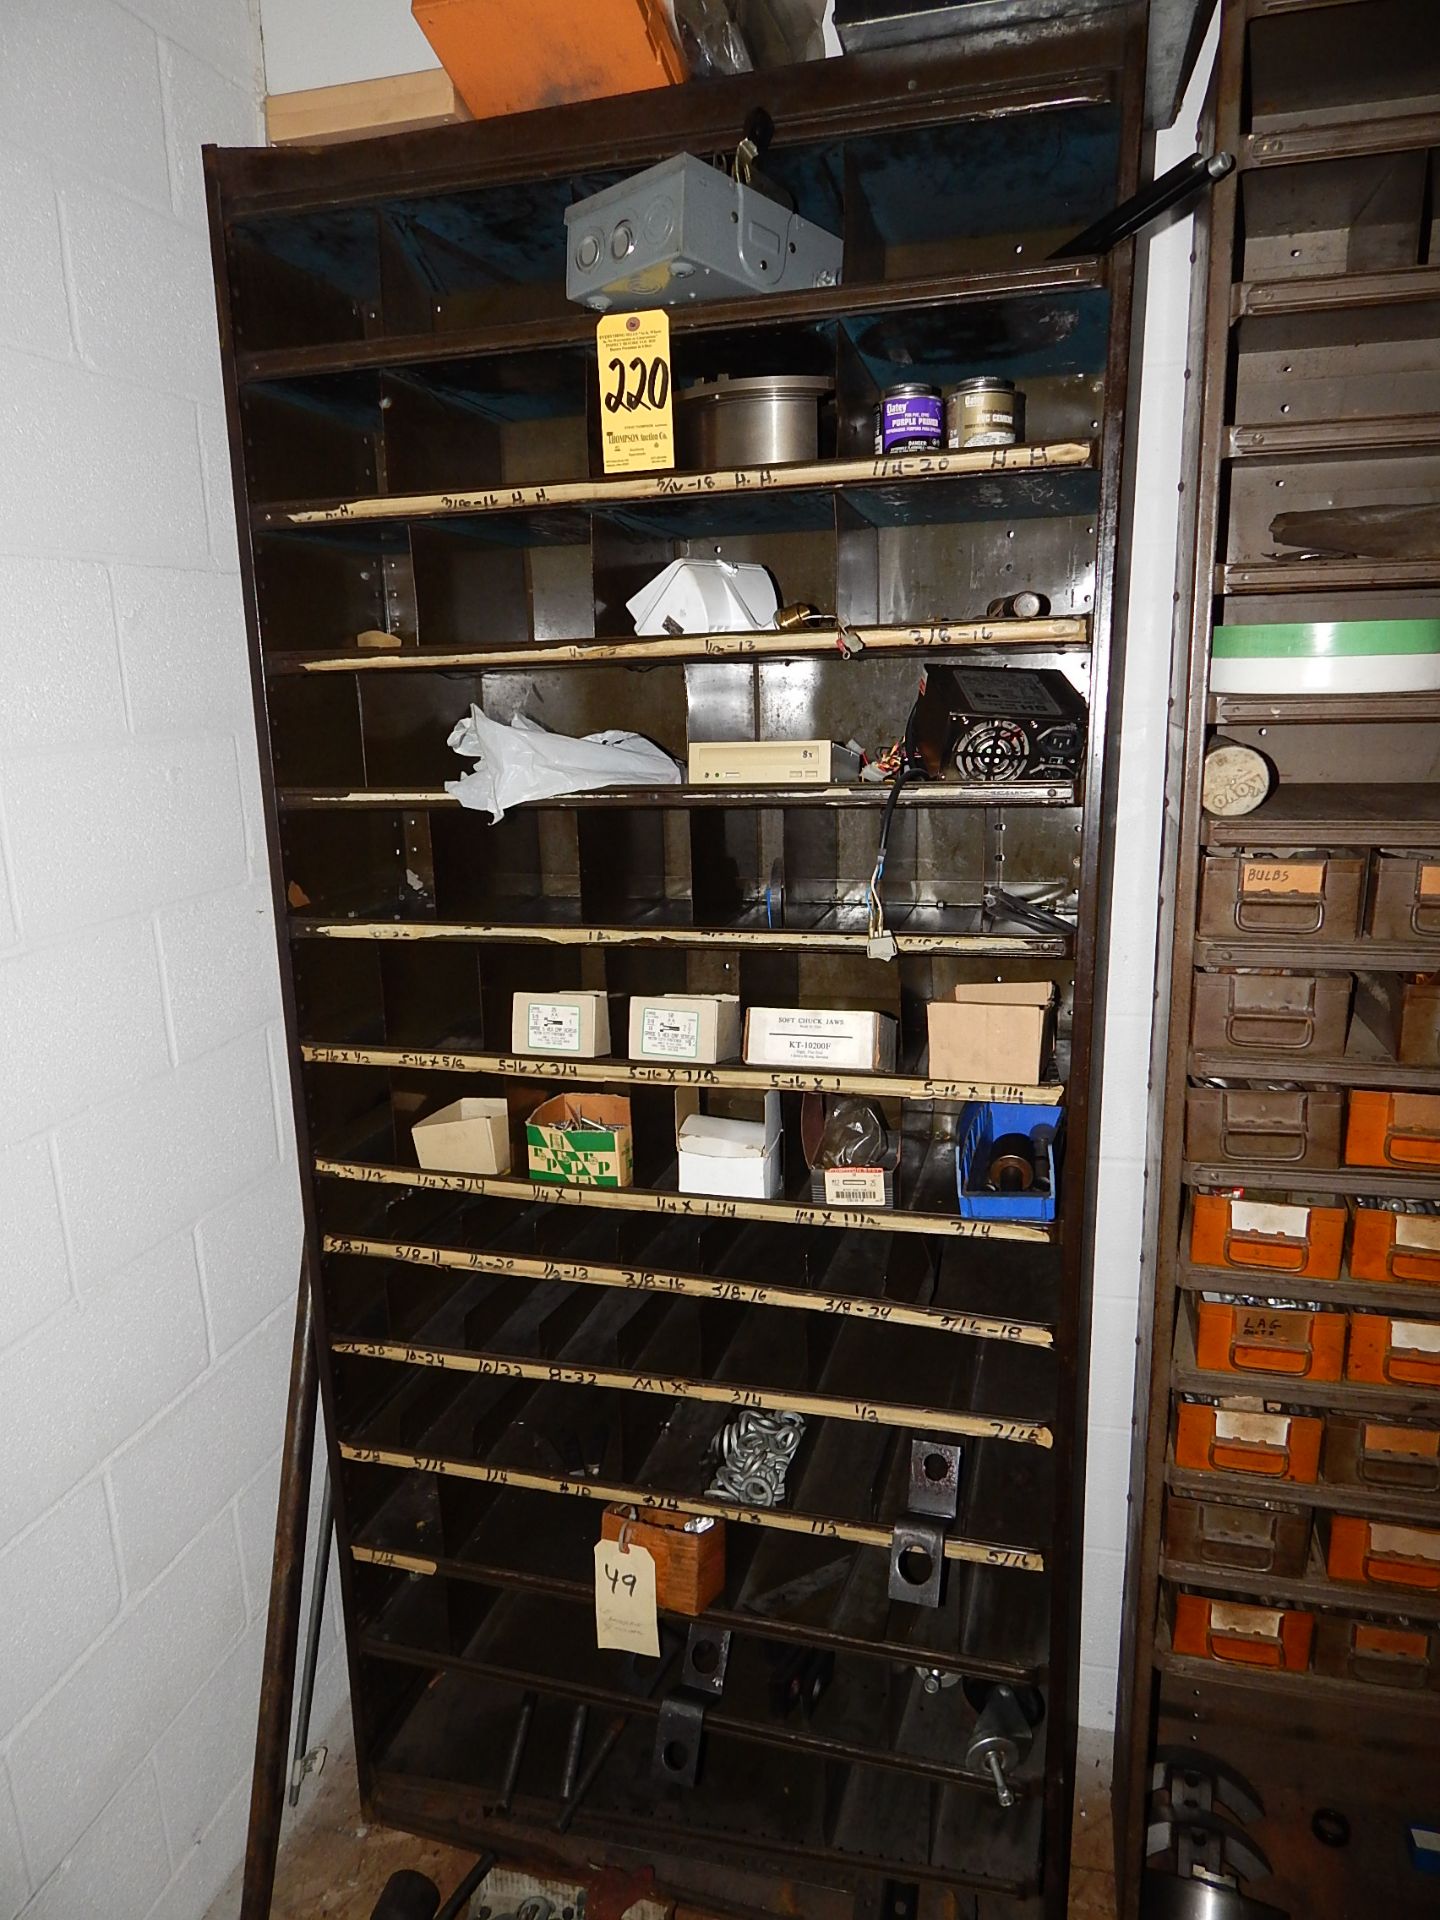 Metal Shelving & Contents, NOTE Located on Mezzanine